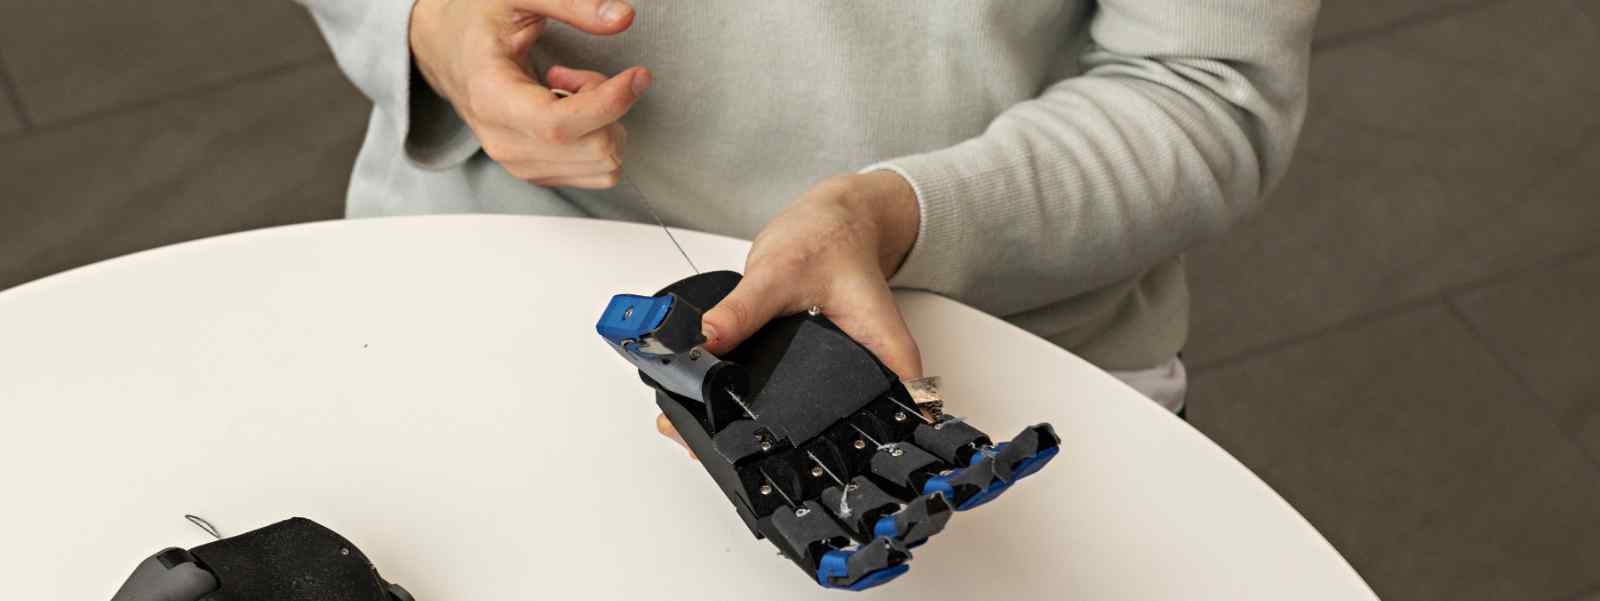 The robotic, prosthetic hand designed by Metacarpal